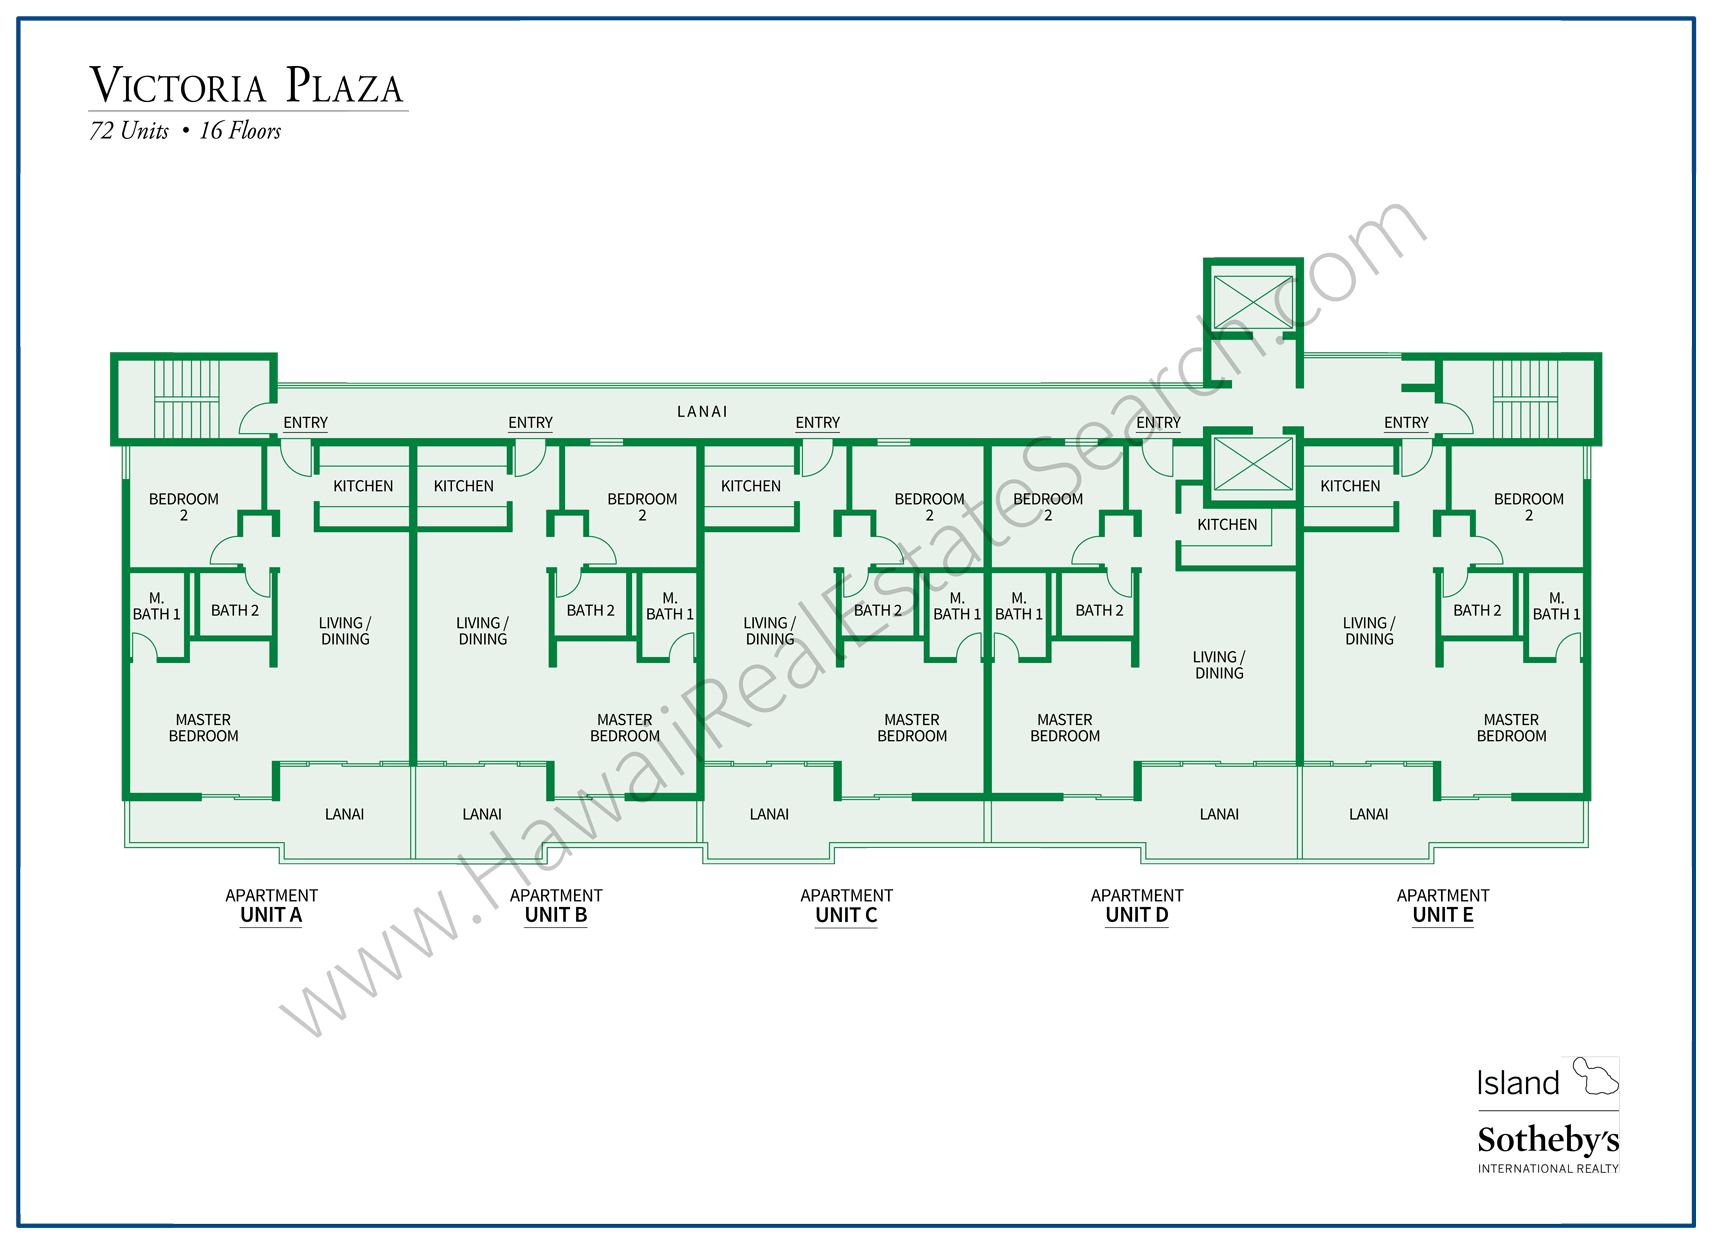 Map of Victoria Plaza on Oahu